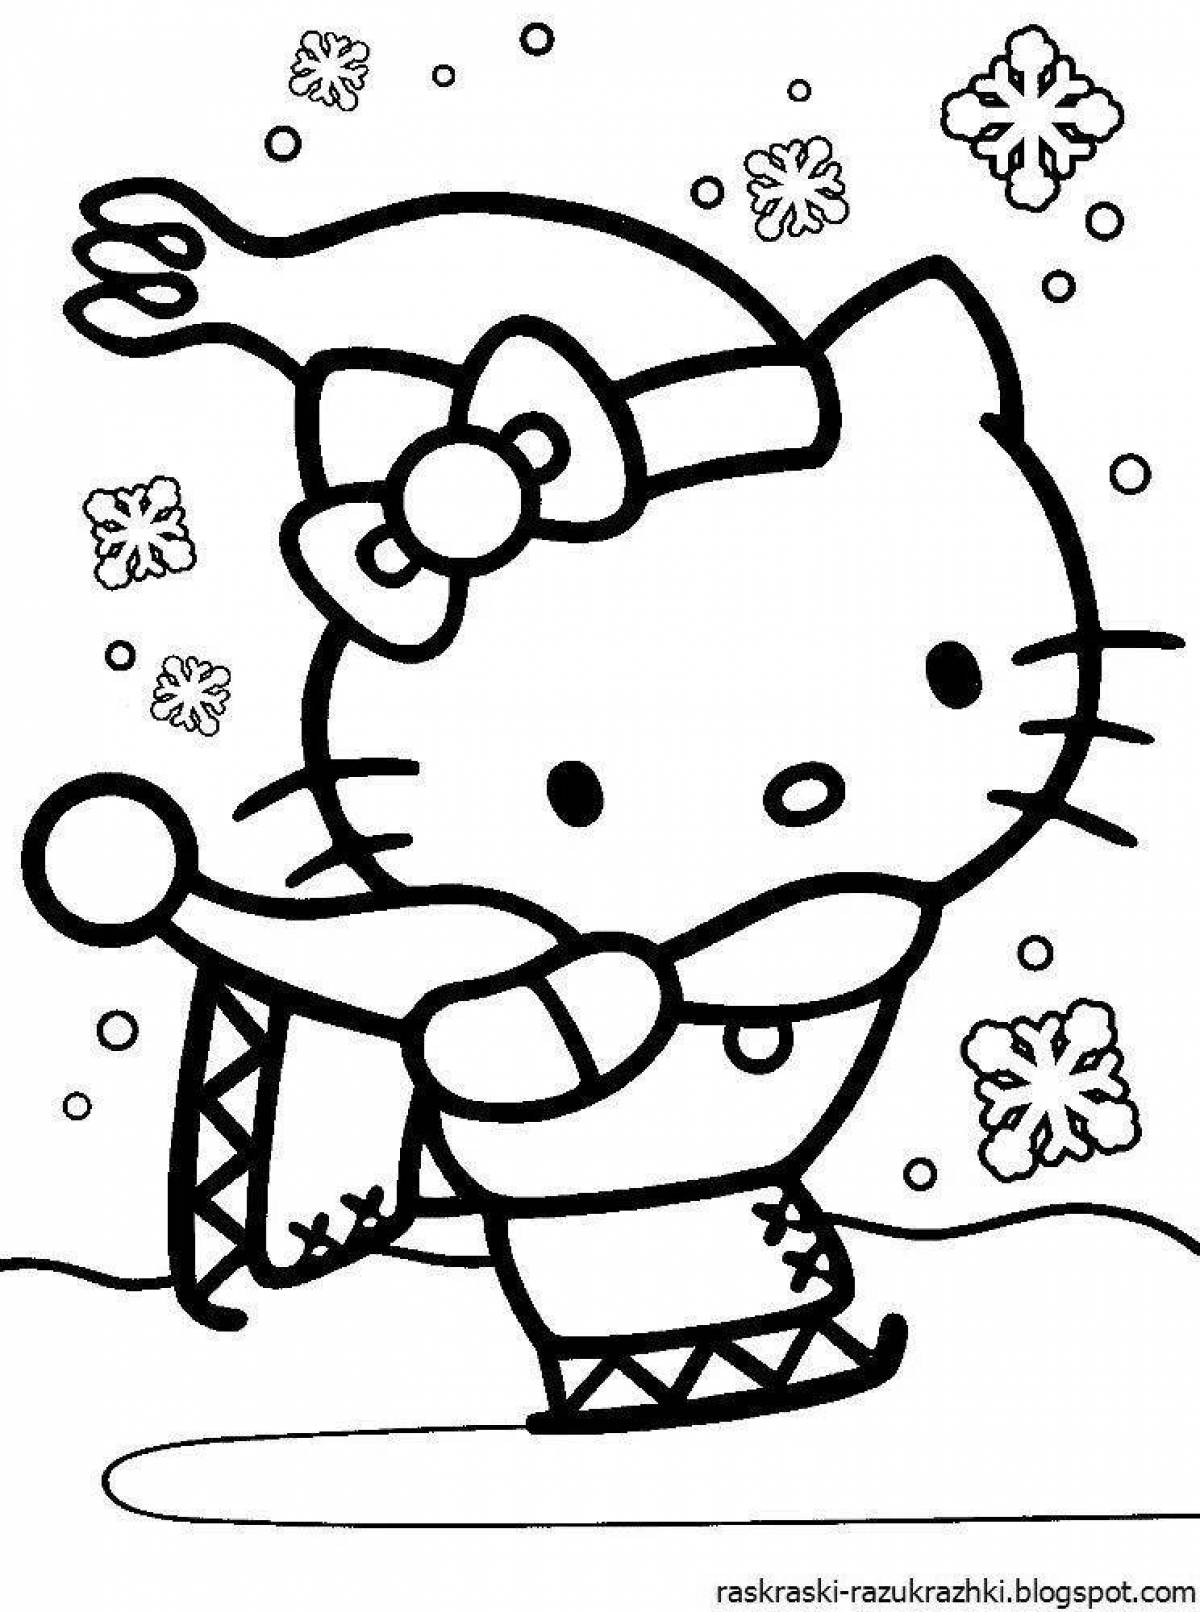 Fancy hello kitty christmas coloring book